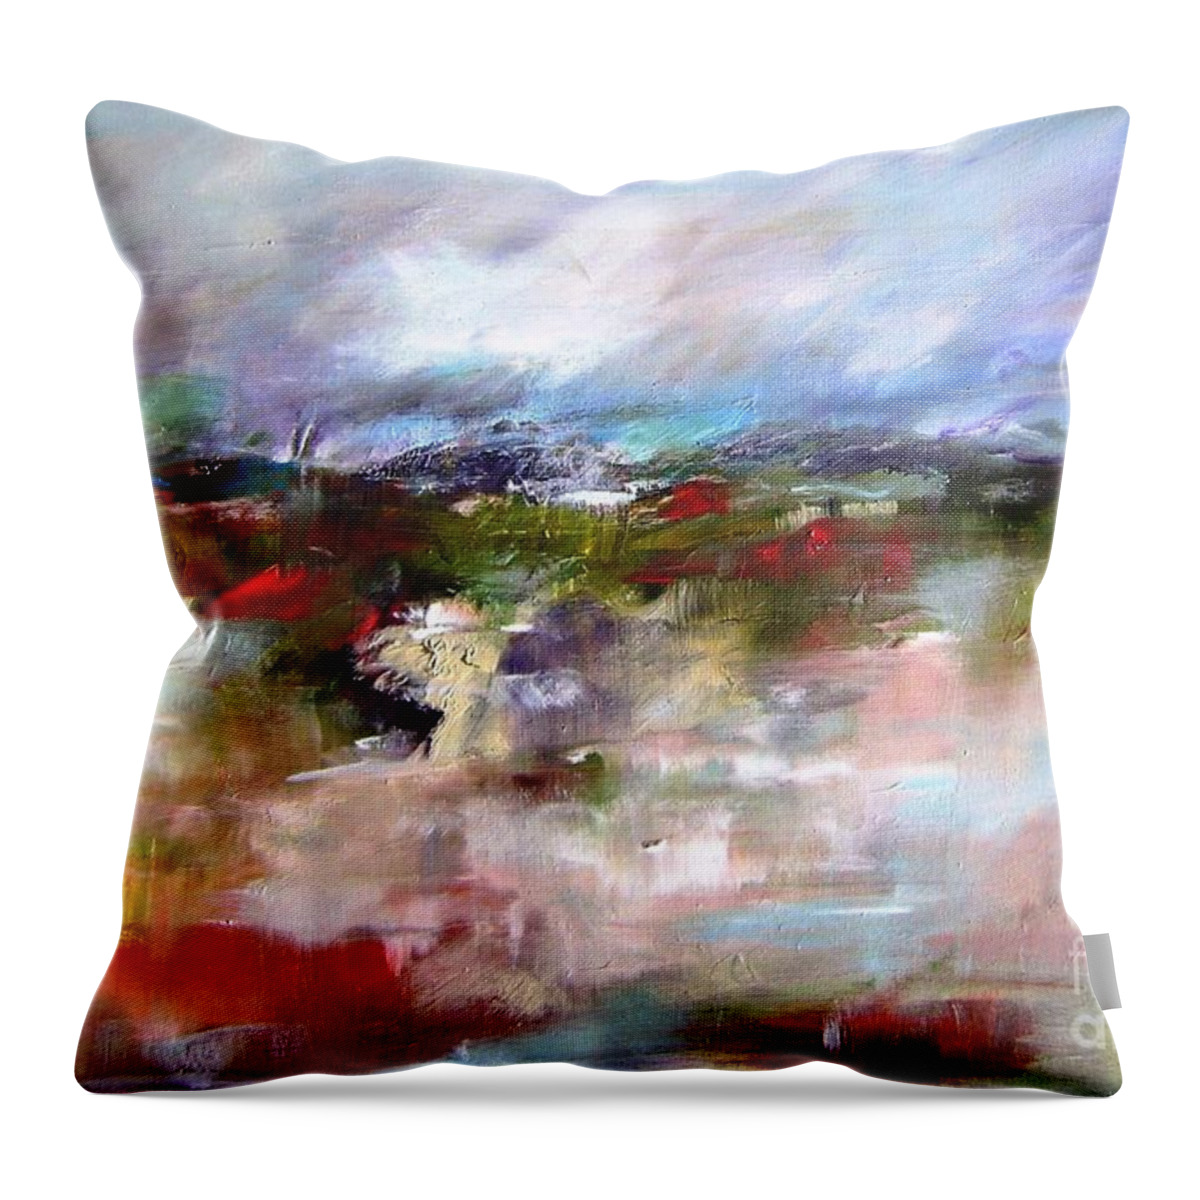 Abstract Throw Pillow featuring the painting Connemara Abstract Landscape Painting by Mary Cahalan Lee - aka PIXI